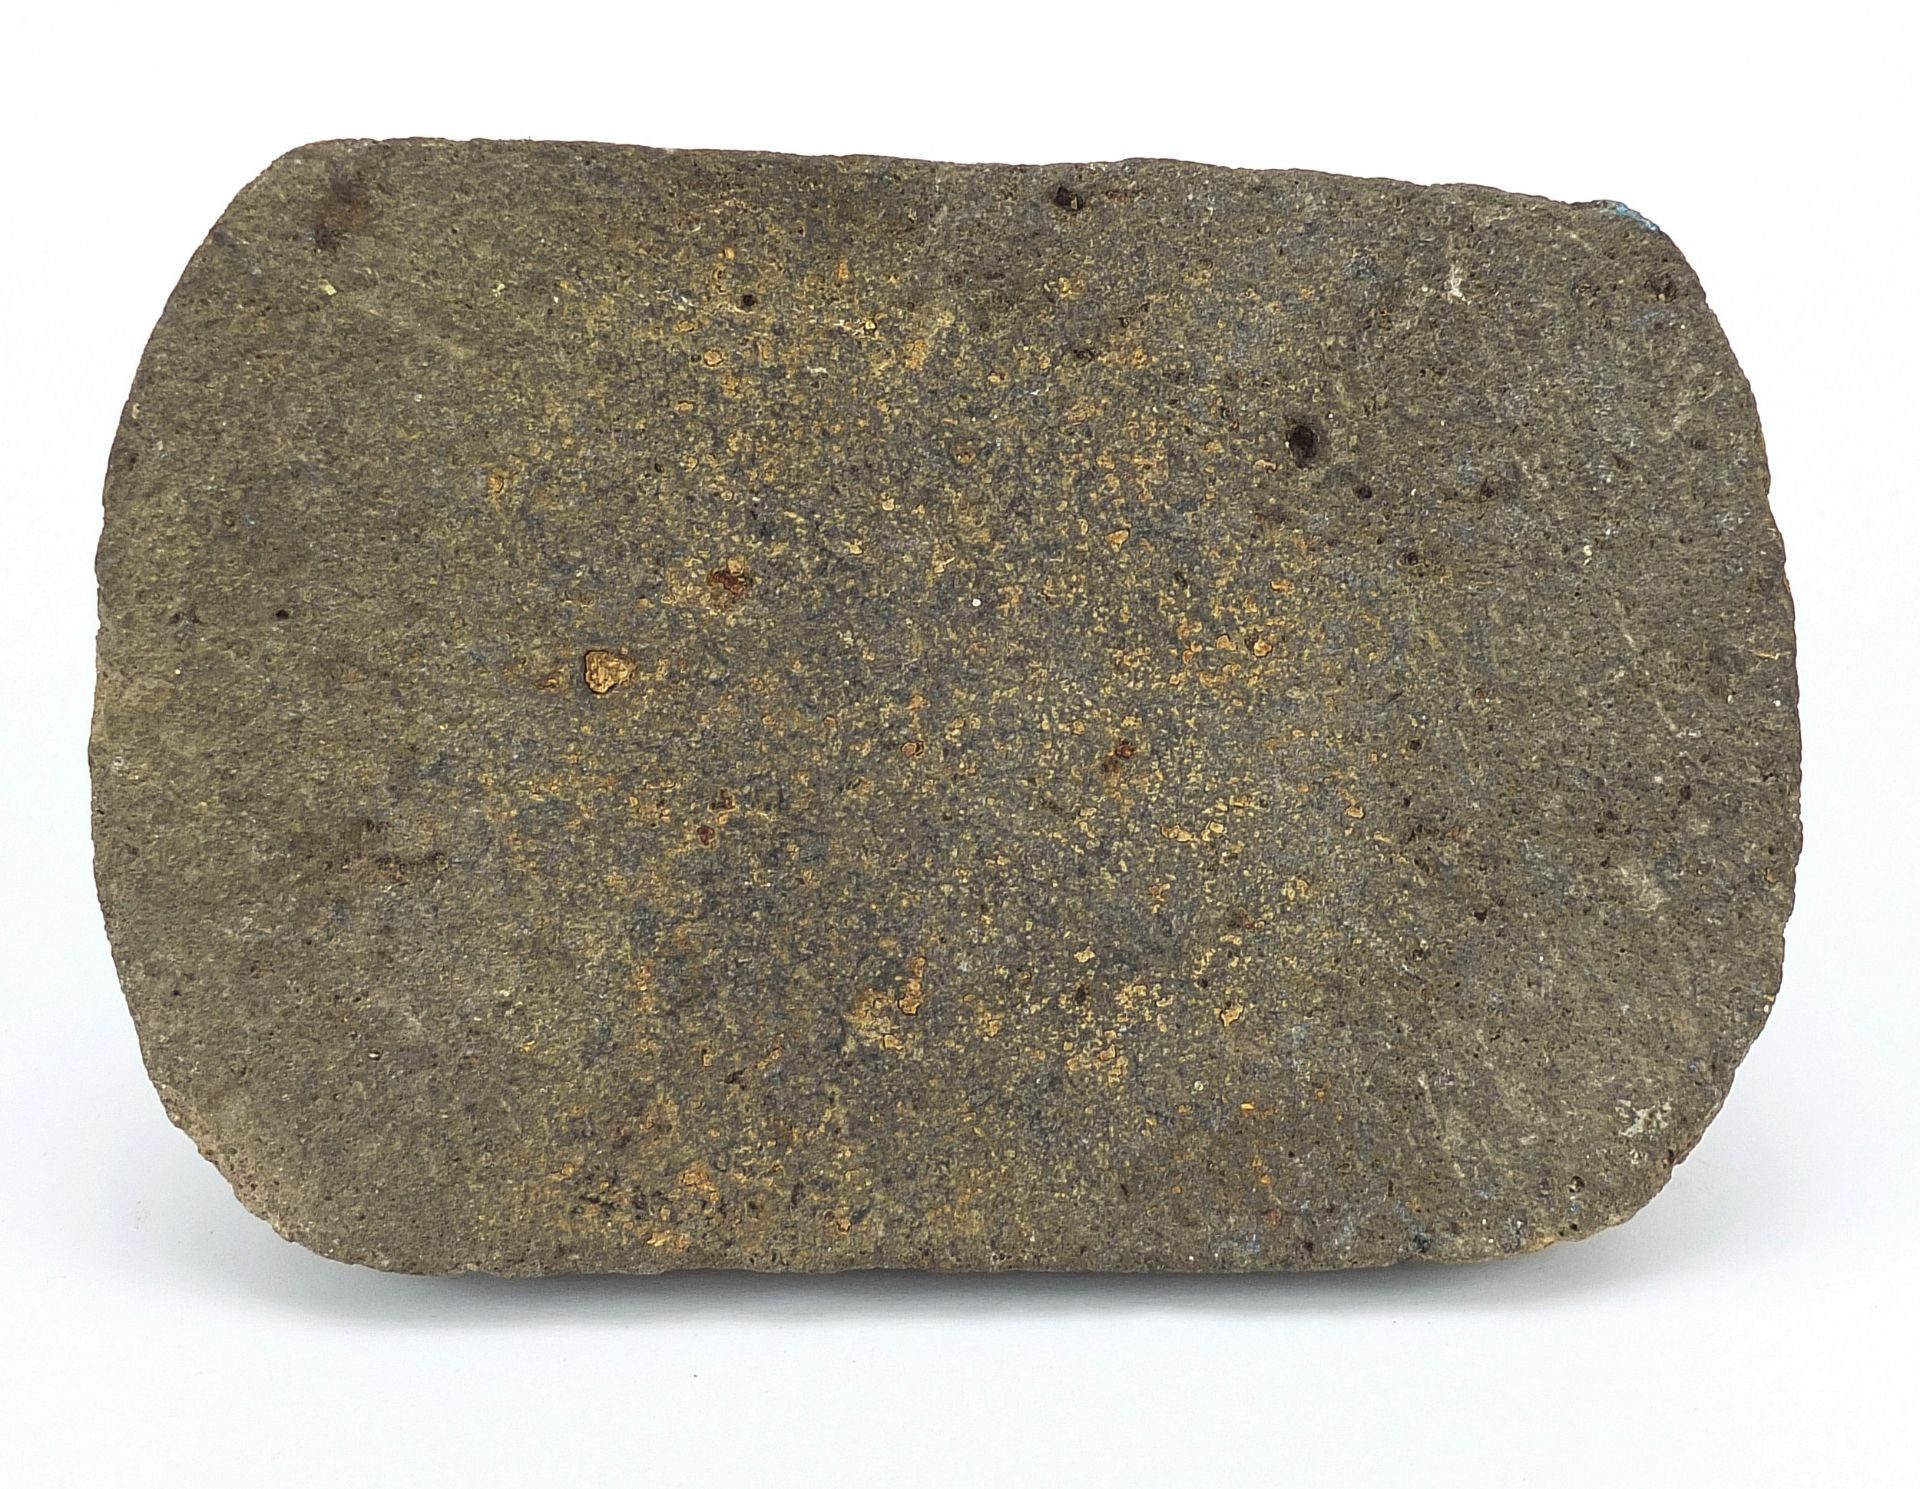 Antique stone three footed headrest, possibly Egpytian or Chinese, 9cm H x 21.5cm W x 14cm D - Bild 3 aus 4